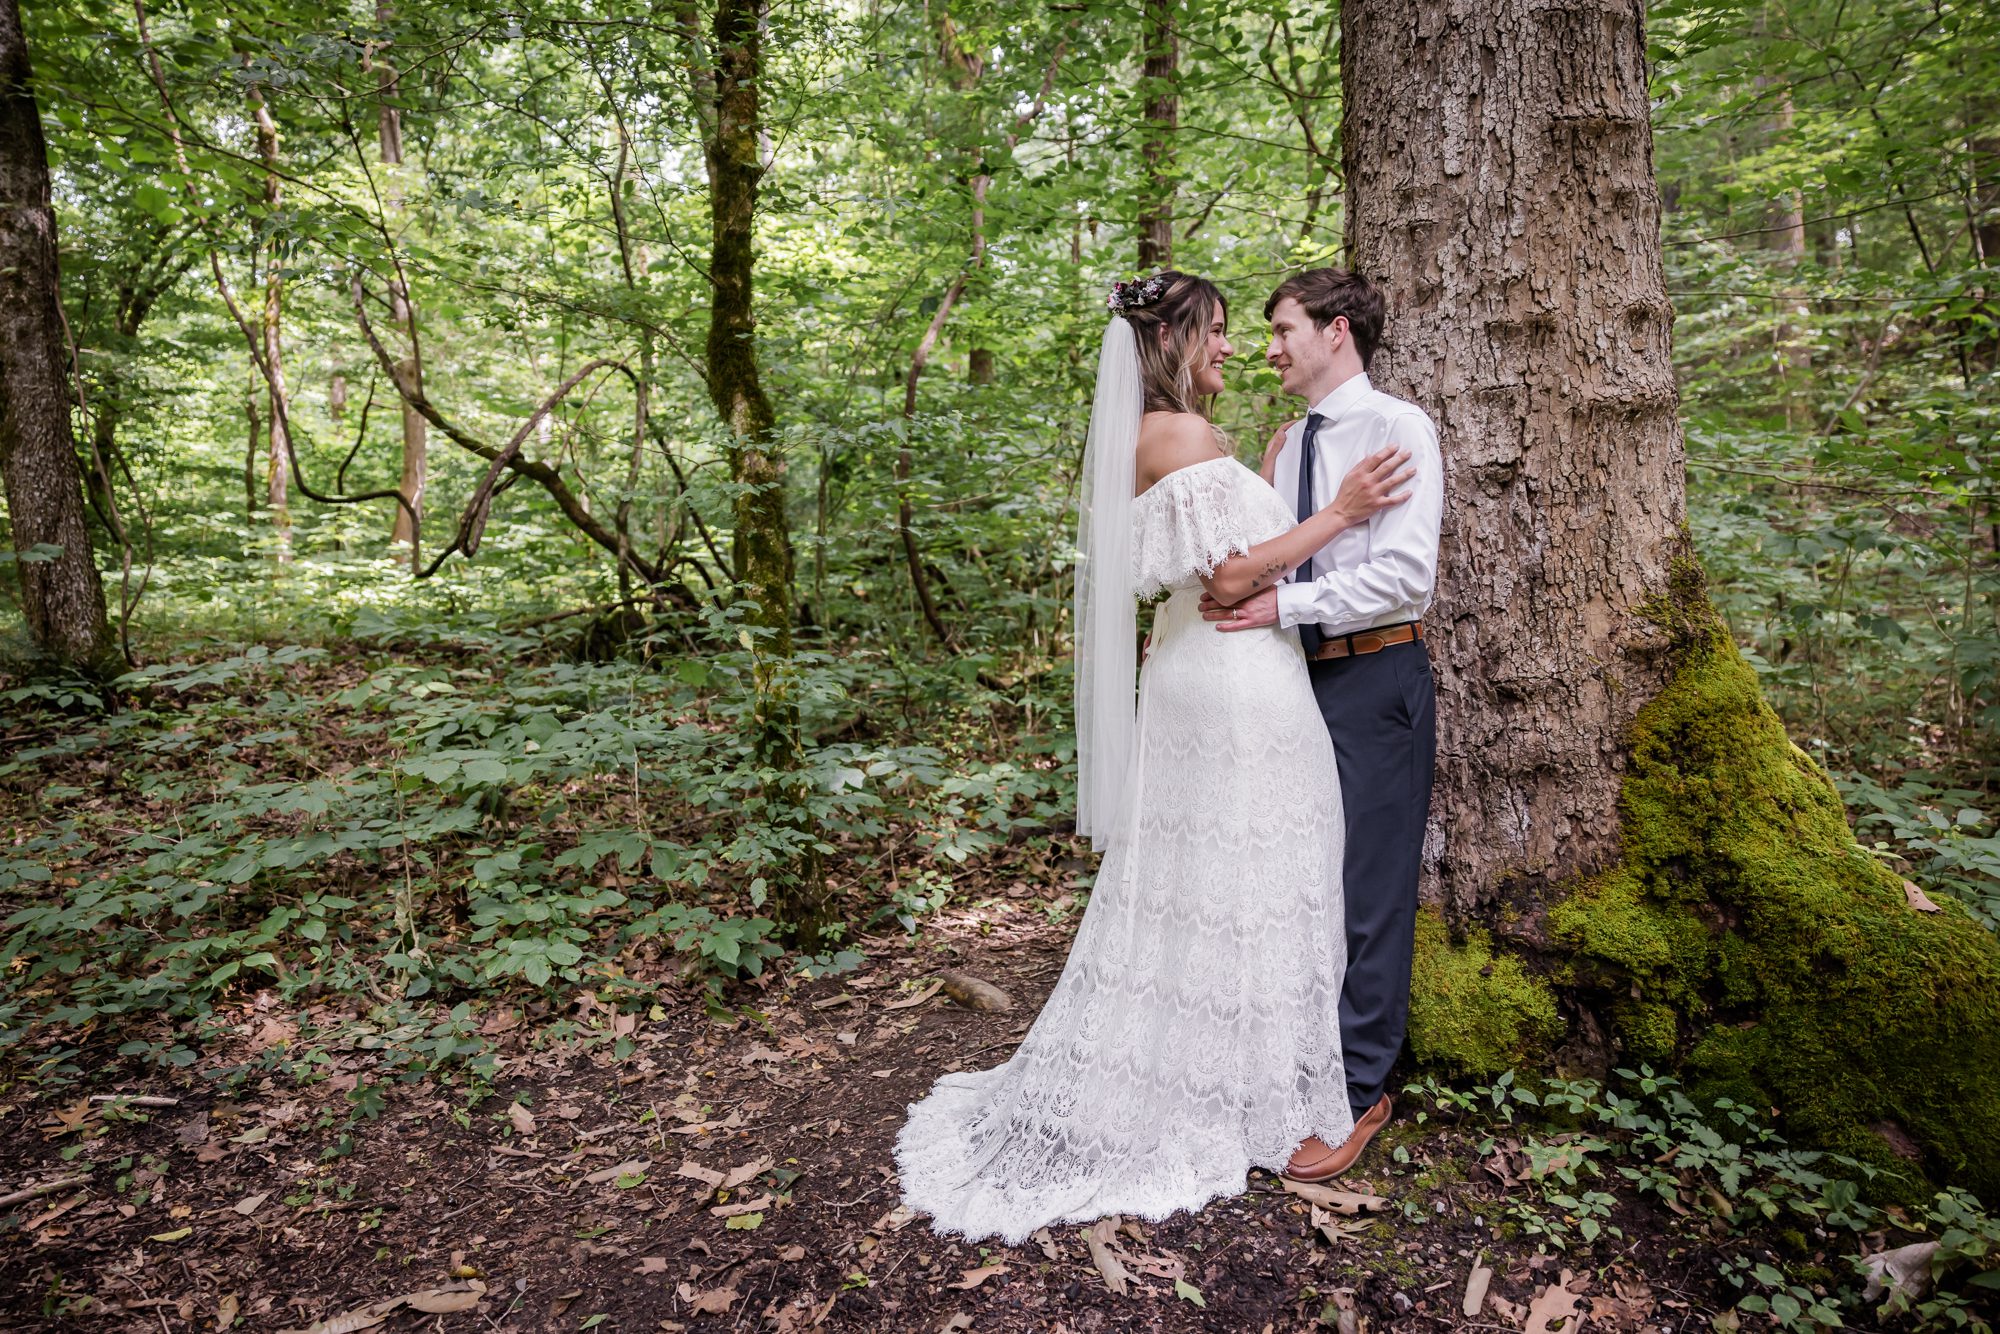 Summer Elopement in the Smoky Mountains